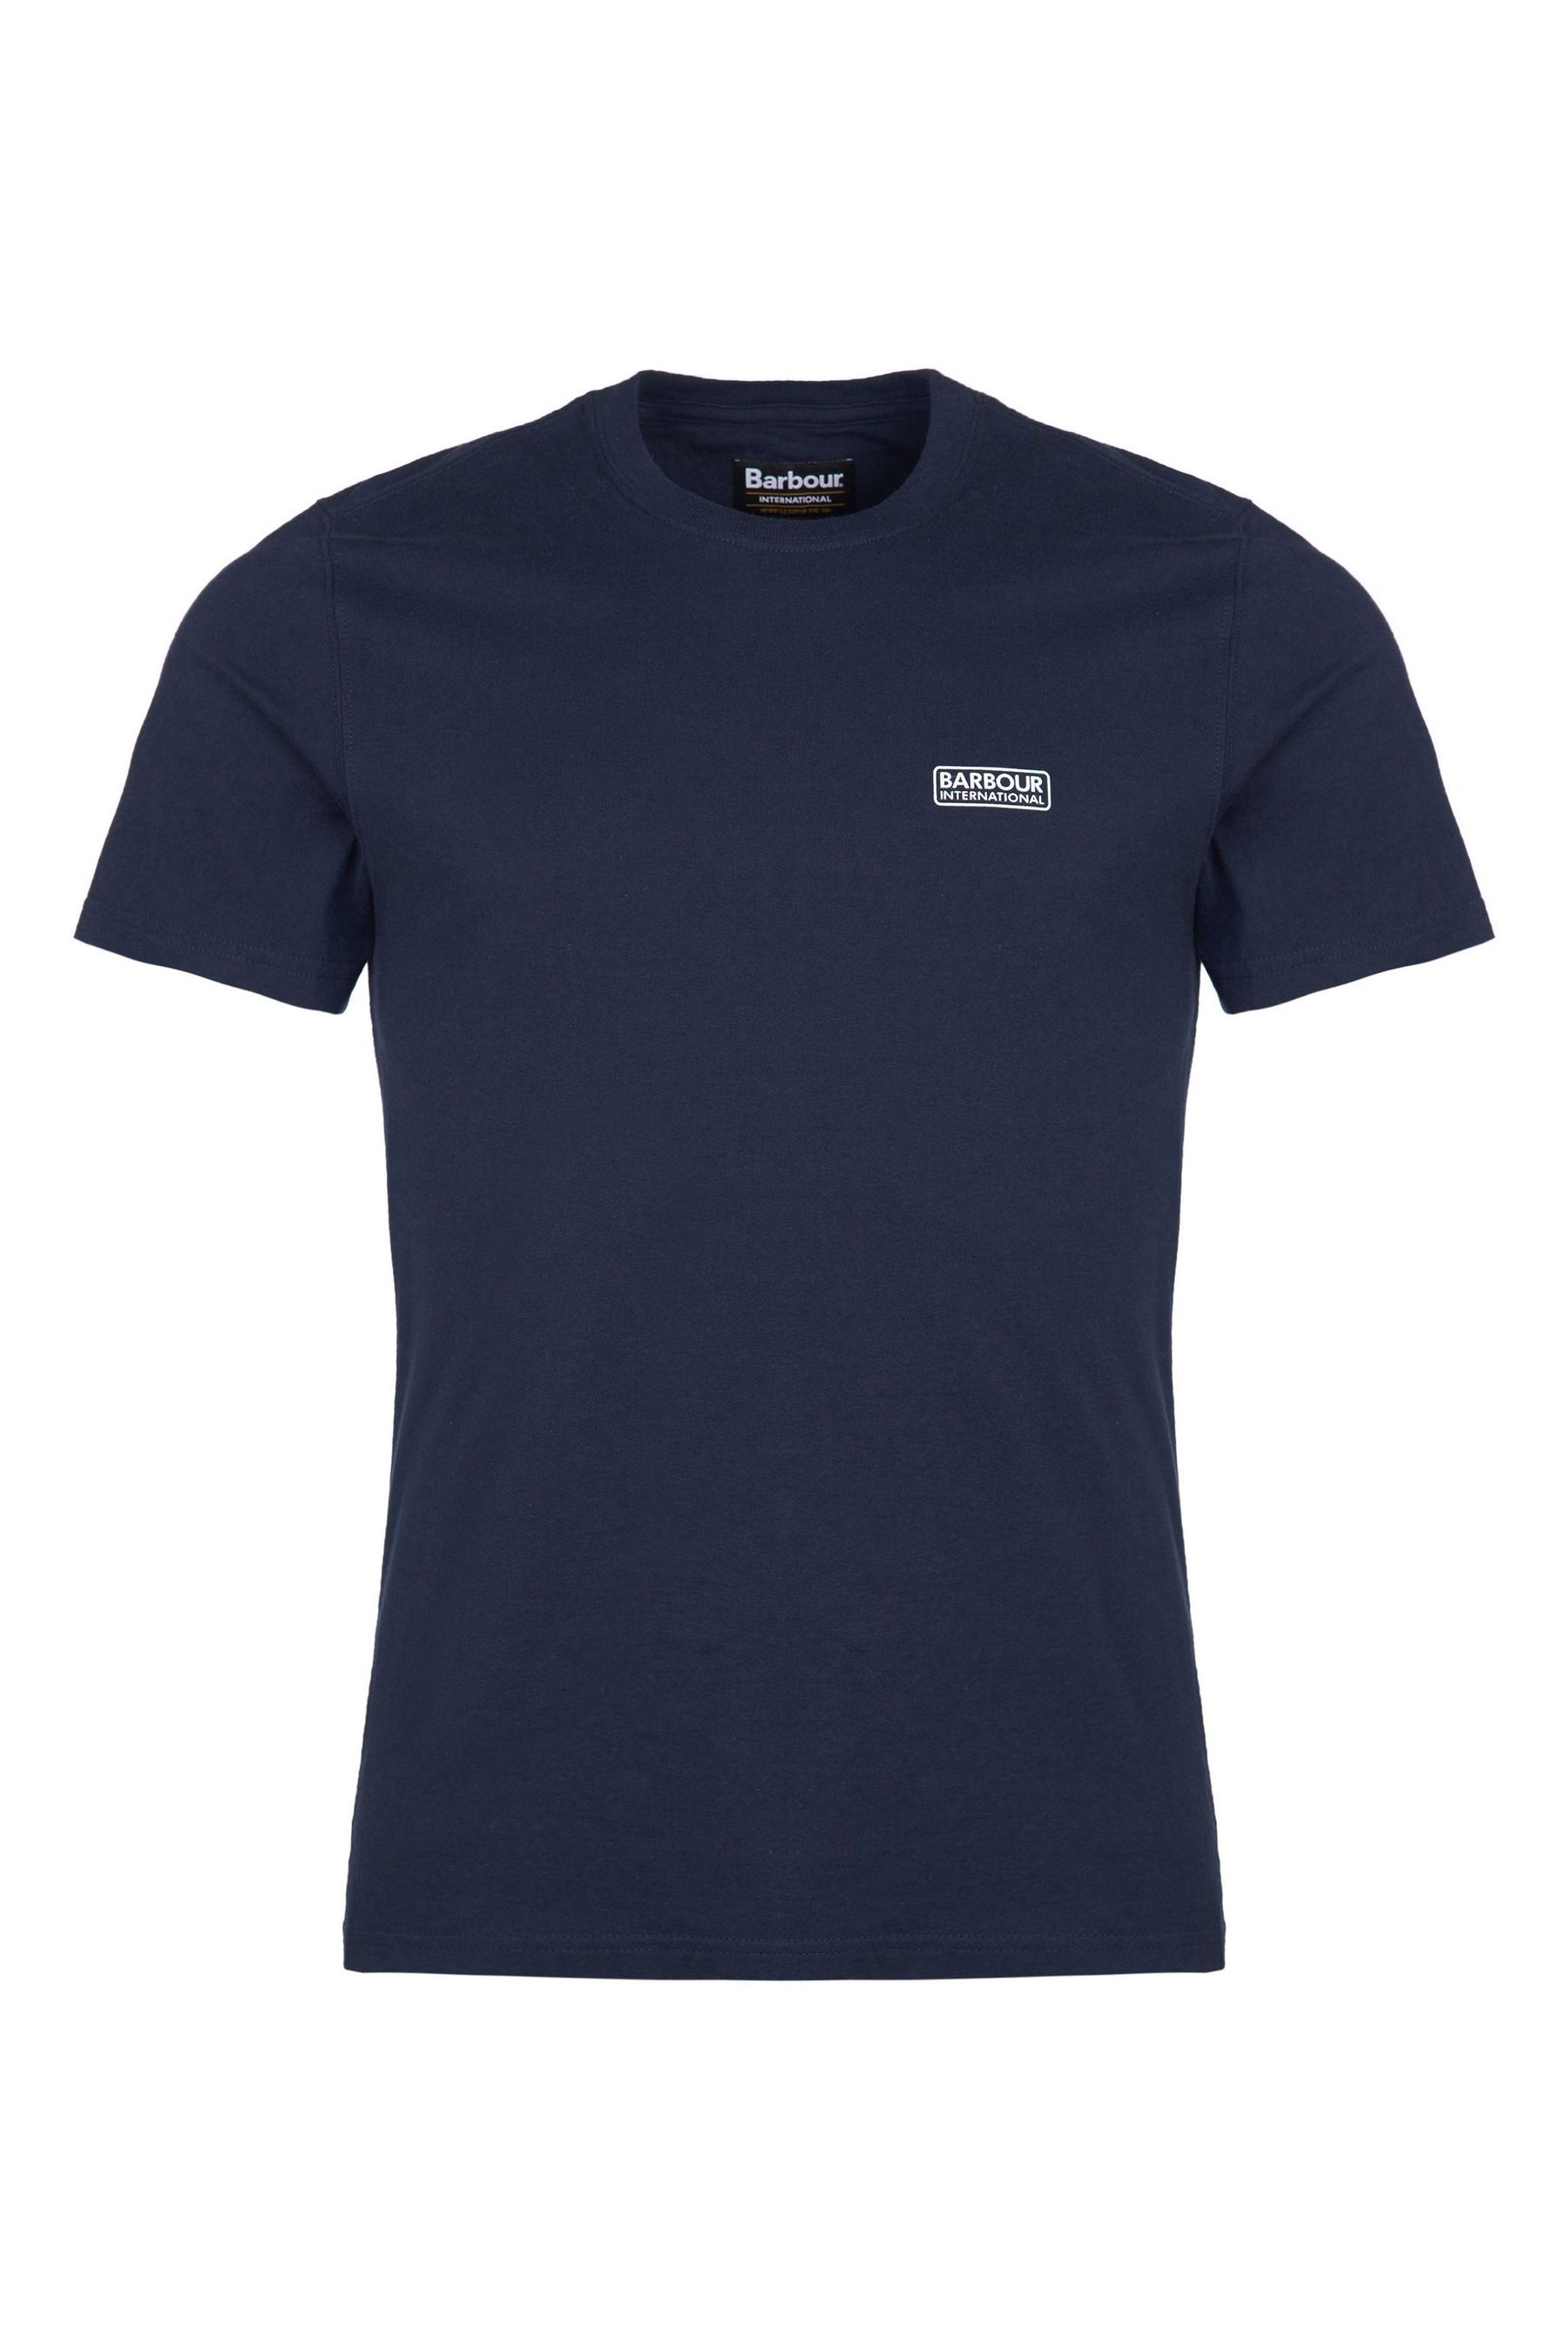 Buy Barbour® International Navy Small Logo Tee from the Next UK online shop